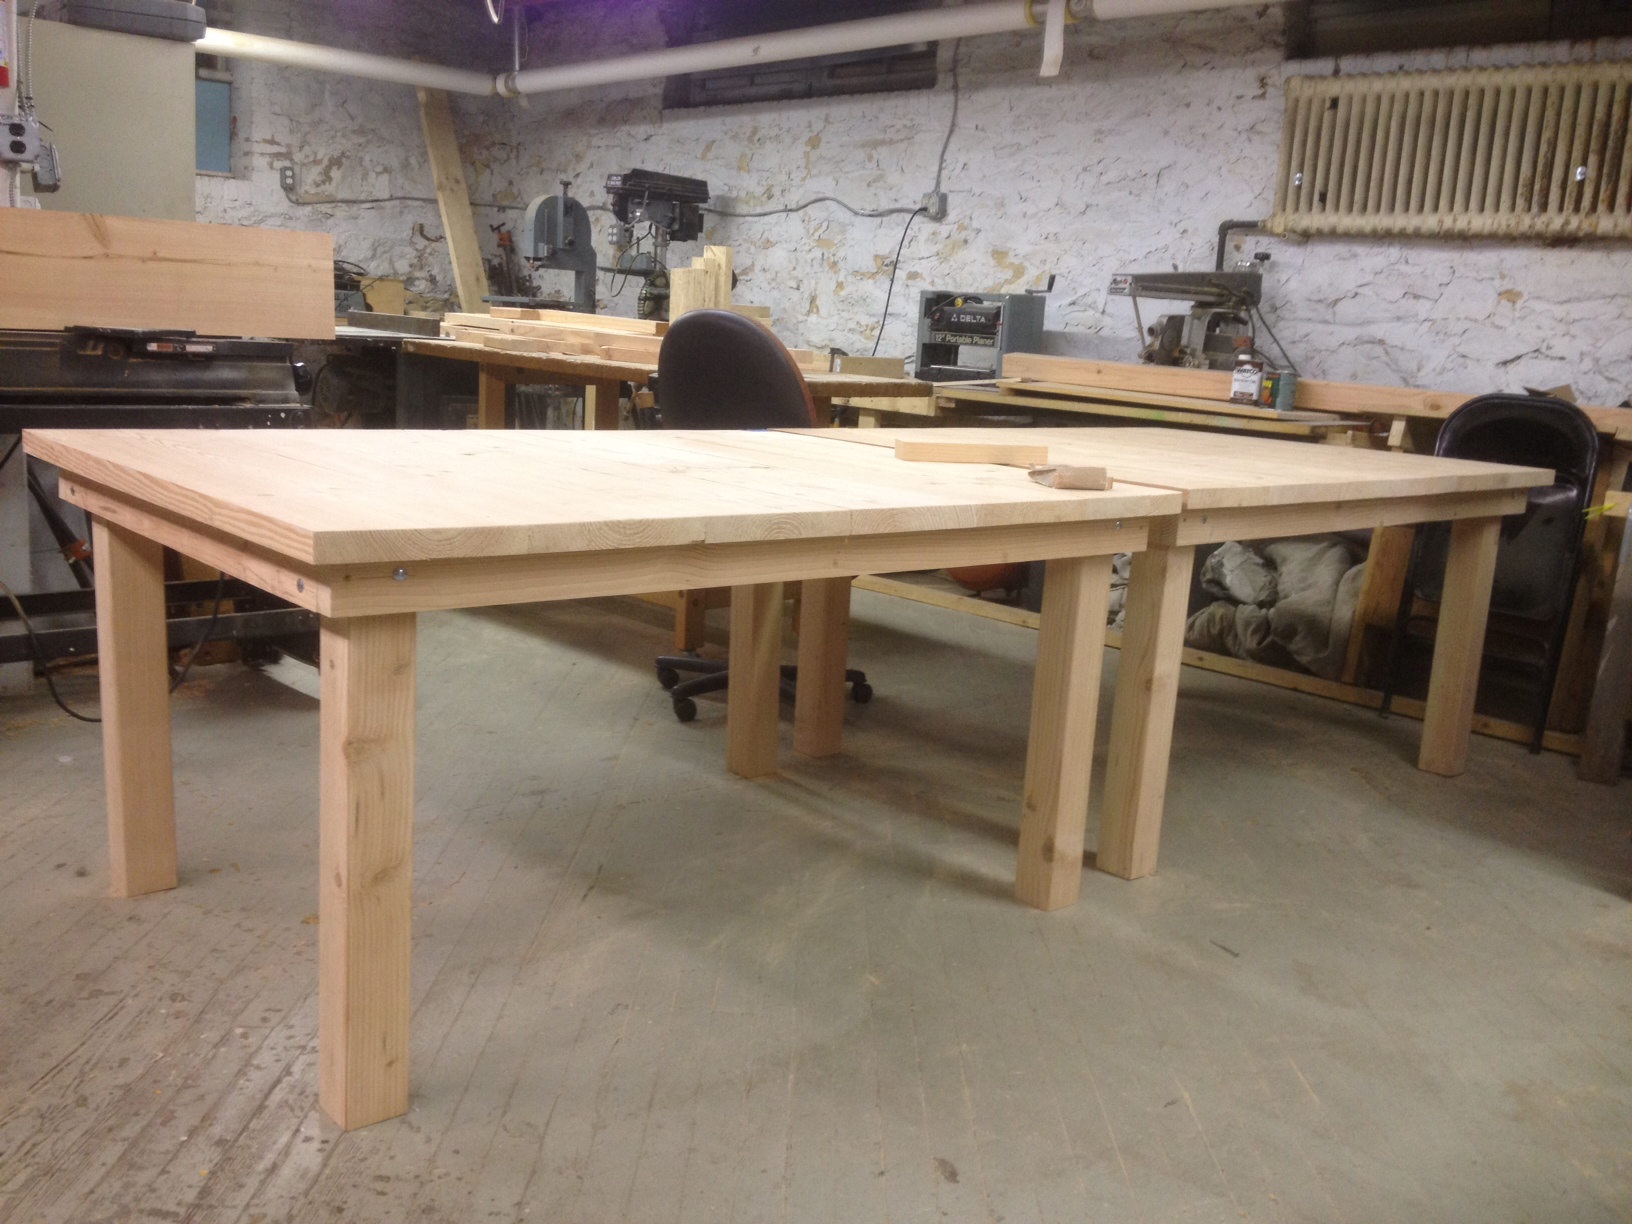 new tables (unfinished)